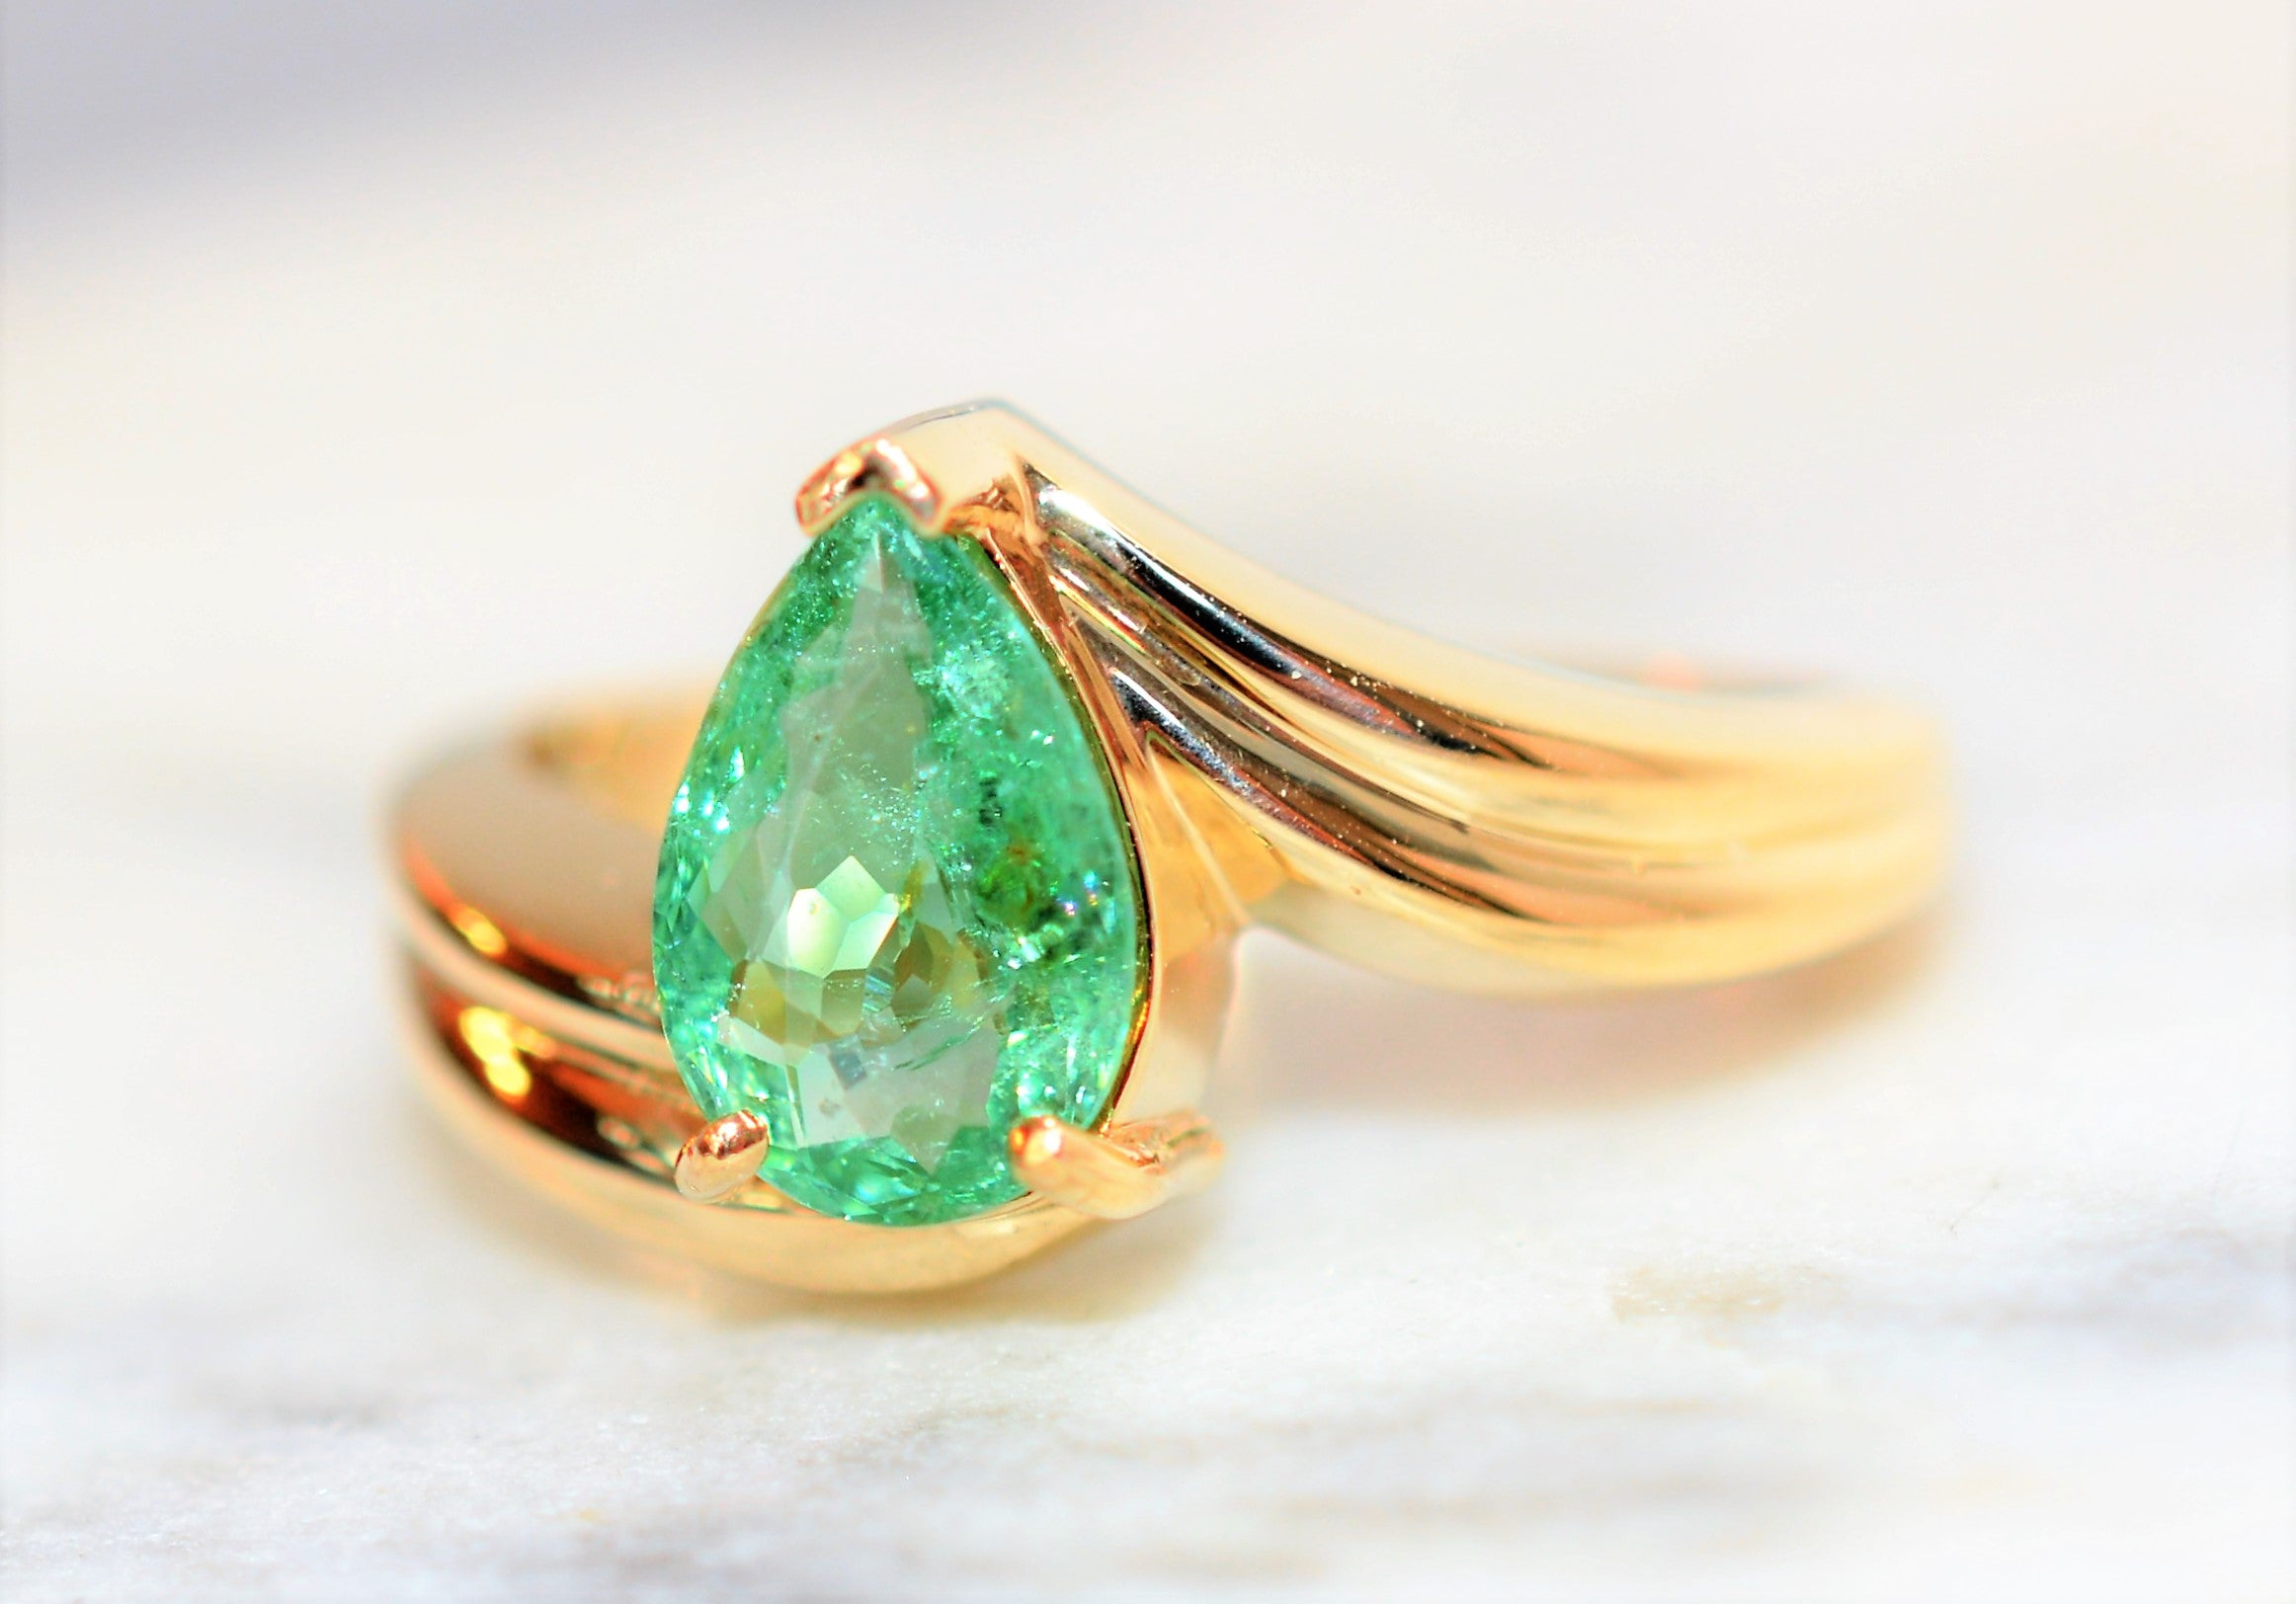 Natural Paraiba Tourmaline Ring 10K Solid Gold 1.32ct Solitaire Ring Pear Ring Gemstone Ring Women's Ring Ladies Ring Statement Ring Jewelry